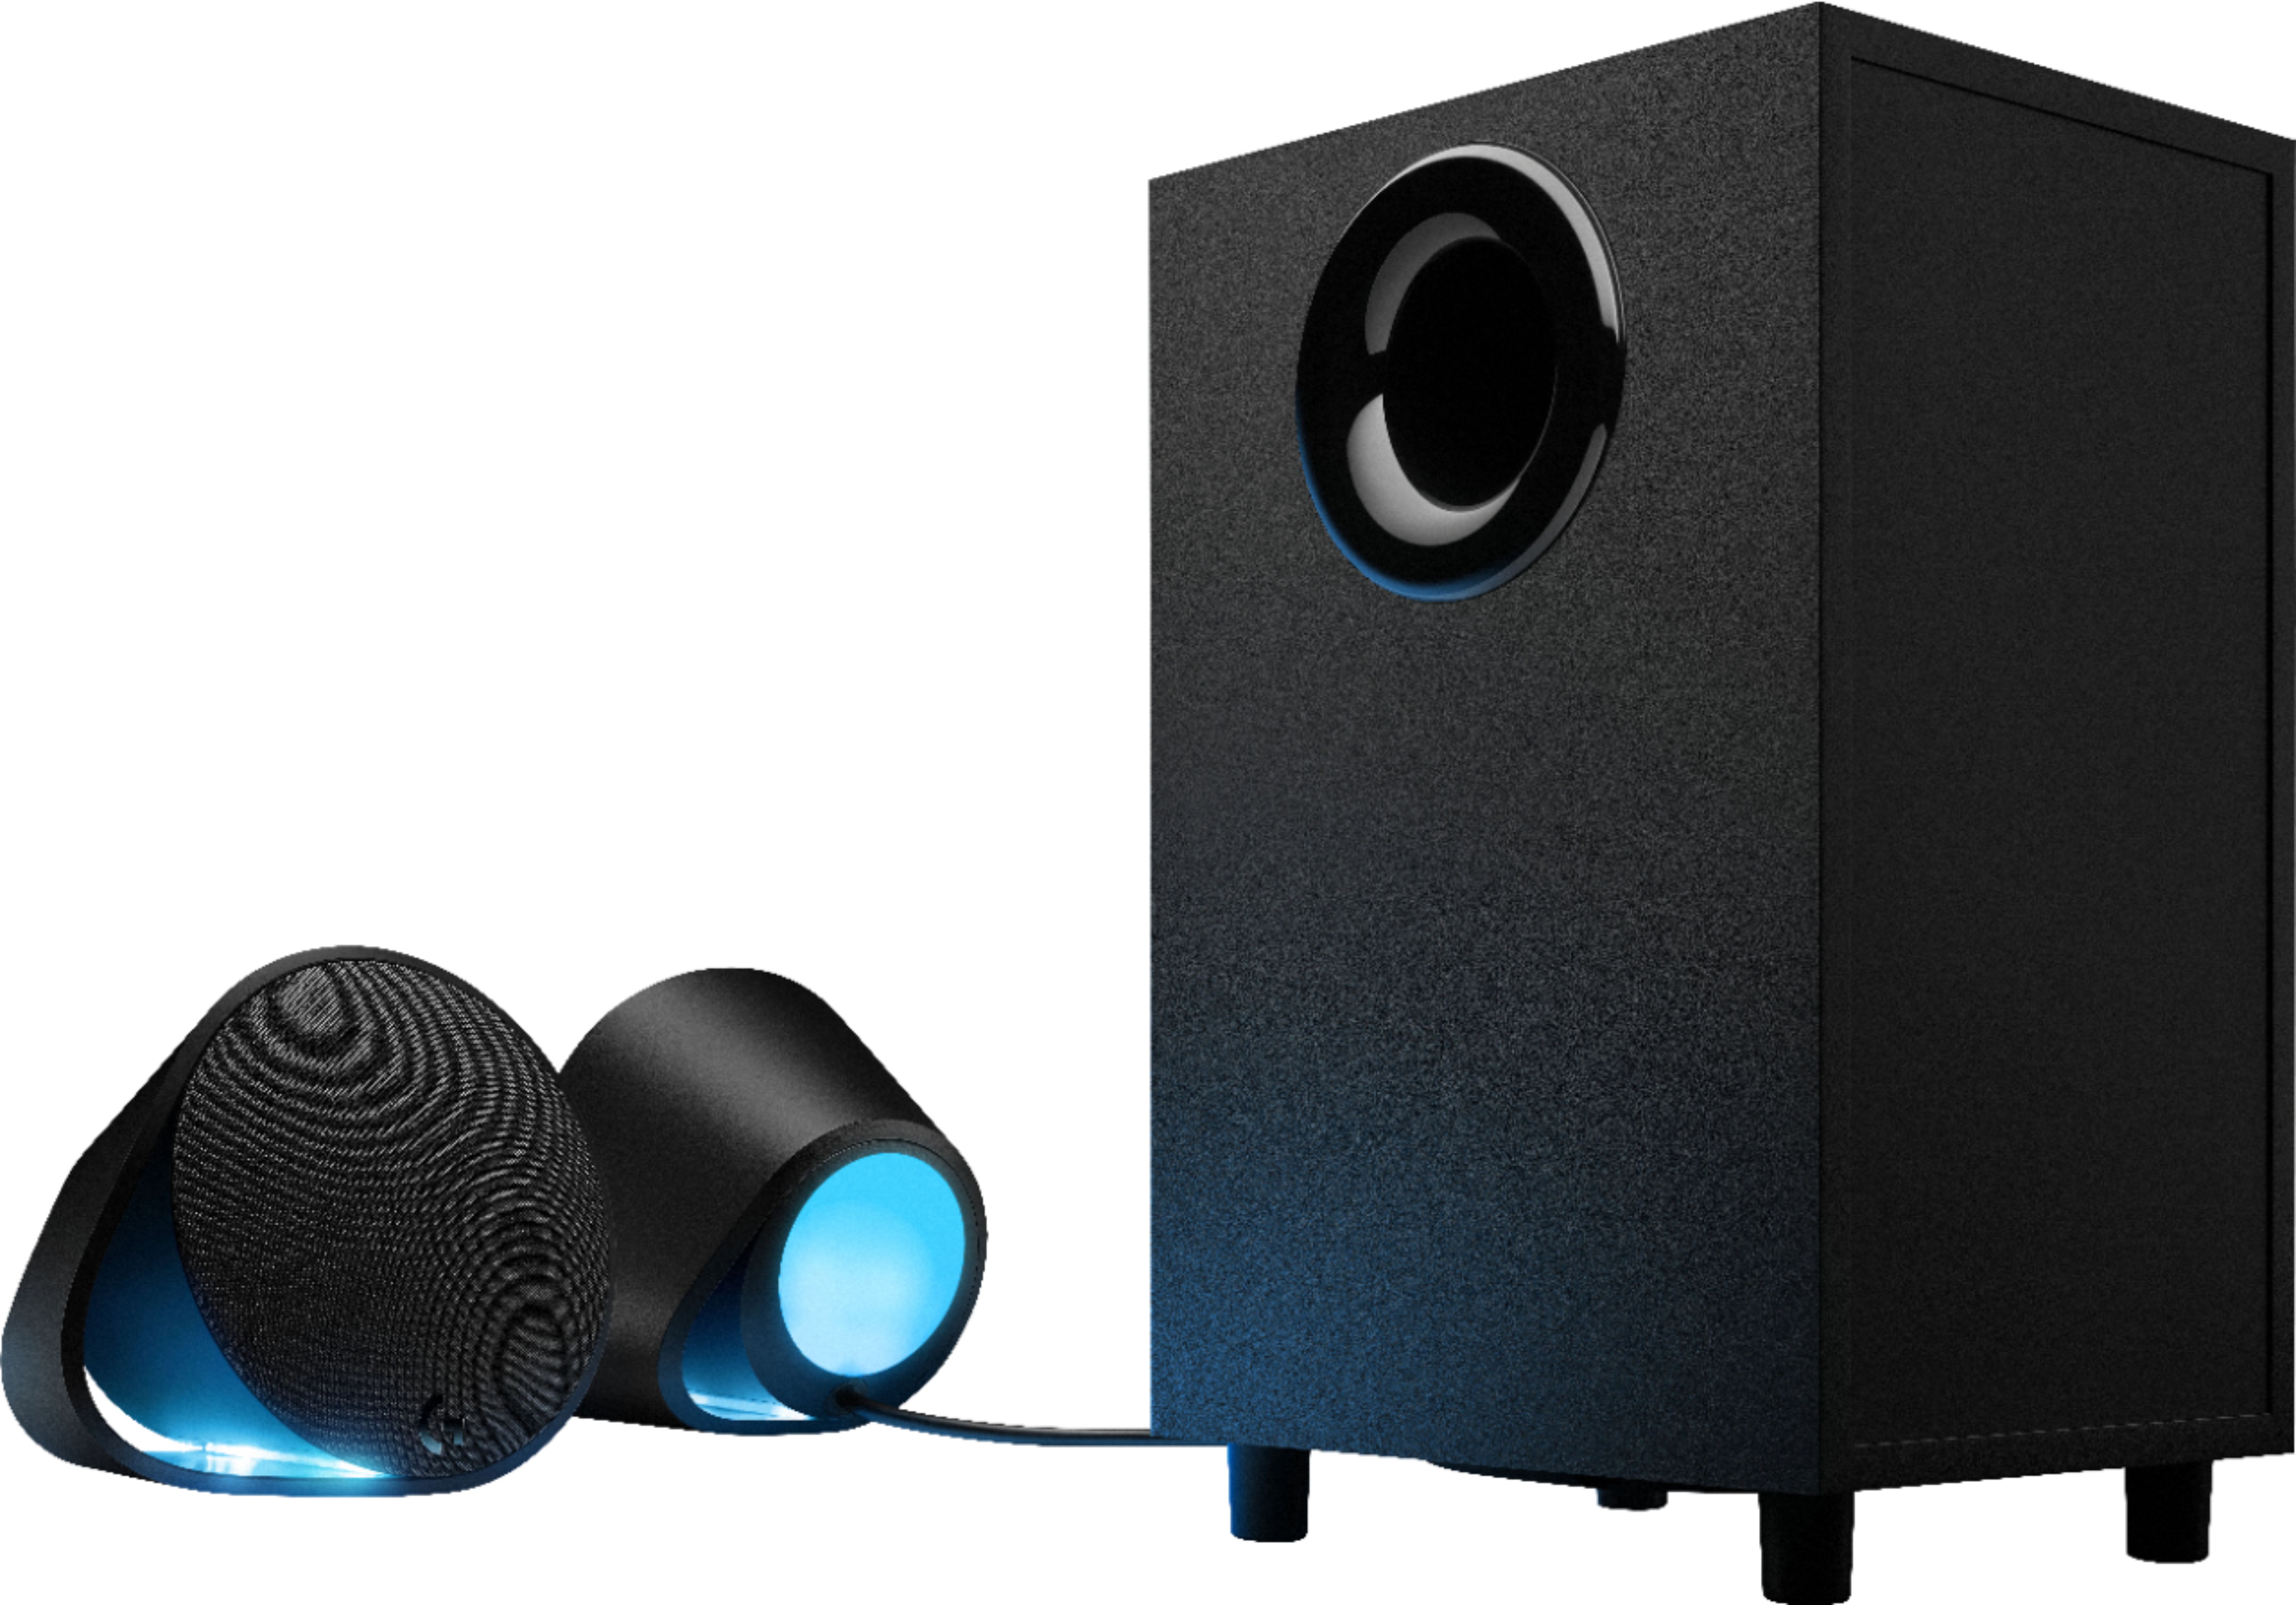 Left View: Logitech - G560 LIGHTSYNC 2.1 Bluetooth Gaming Speakers with Game Driven RGB Lighting (3-Piece) - Black